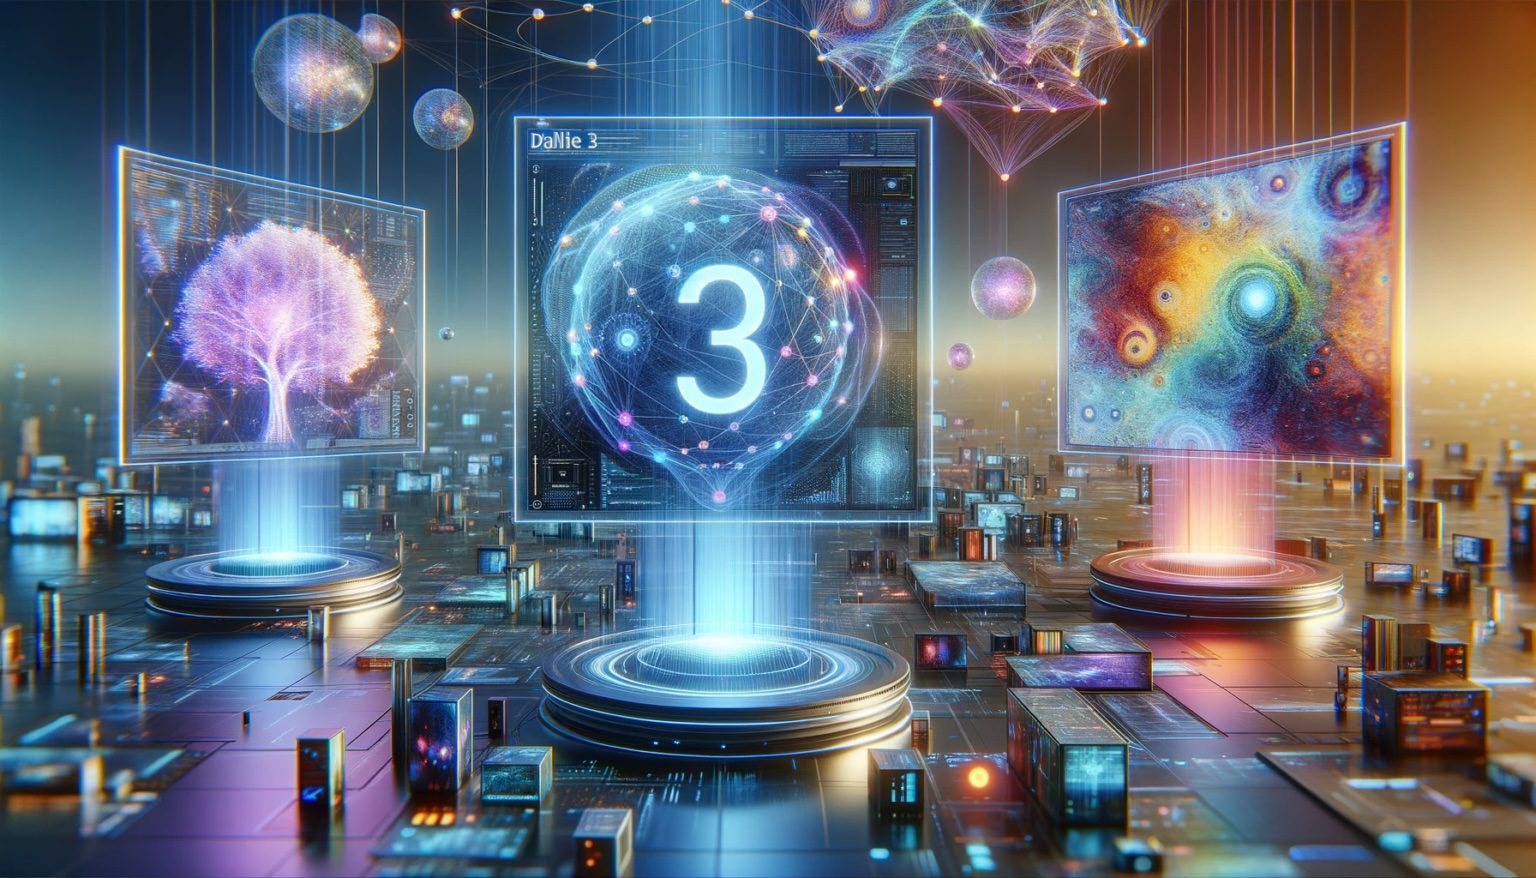 Photo-realistic image of a futuristic digital landscape with floating holographic screens displaying various art generated by an AI. Prominently in the center is a screen showcasing the text 'DALL·E 3'. Around it, abstract digital patterns and neural network visualizations create a vibrant background. The atmosphere suggests cutting-edge technology and innovation.